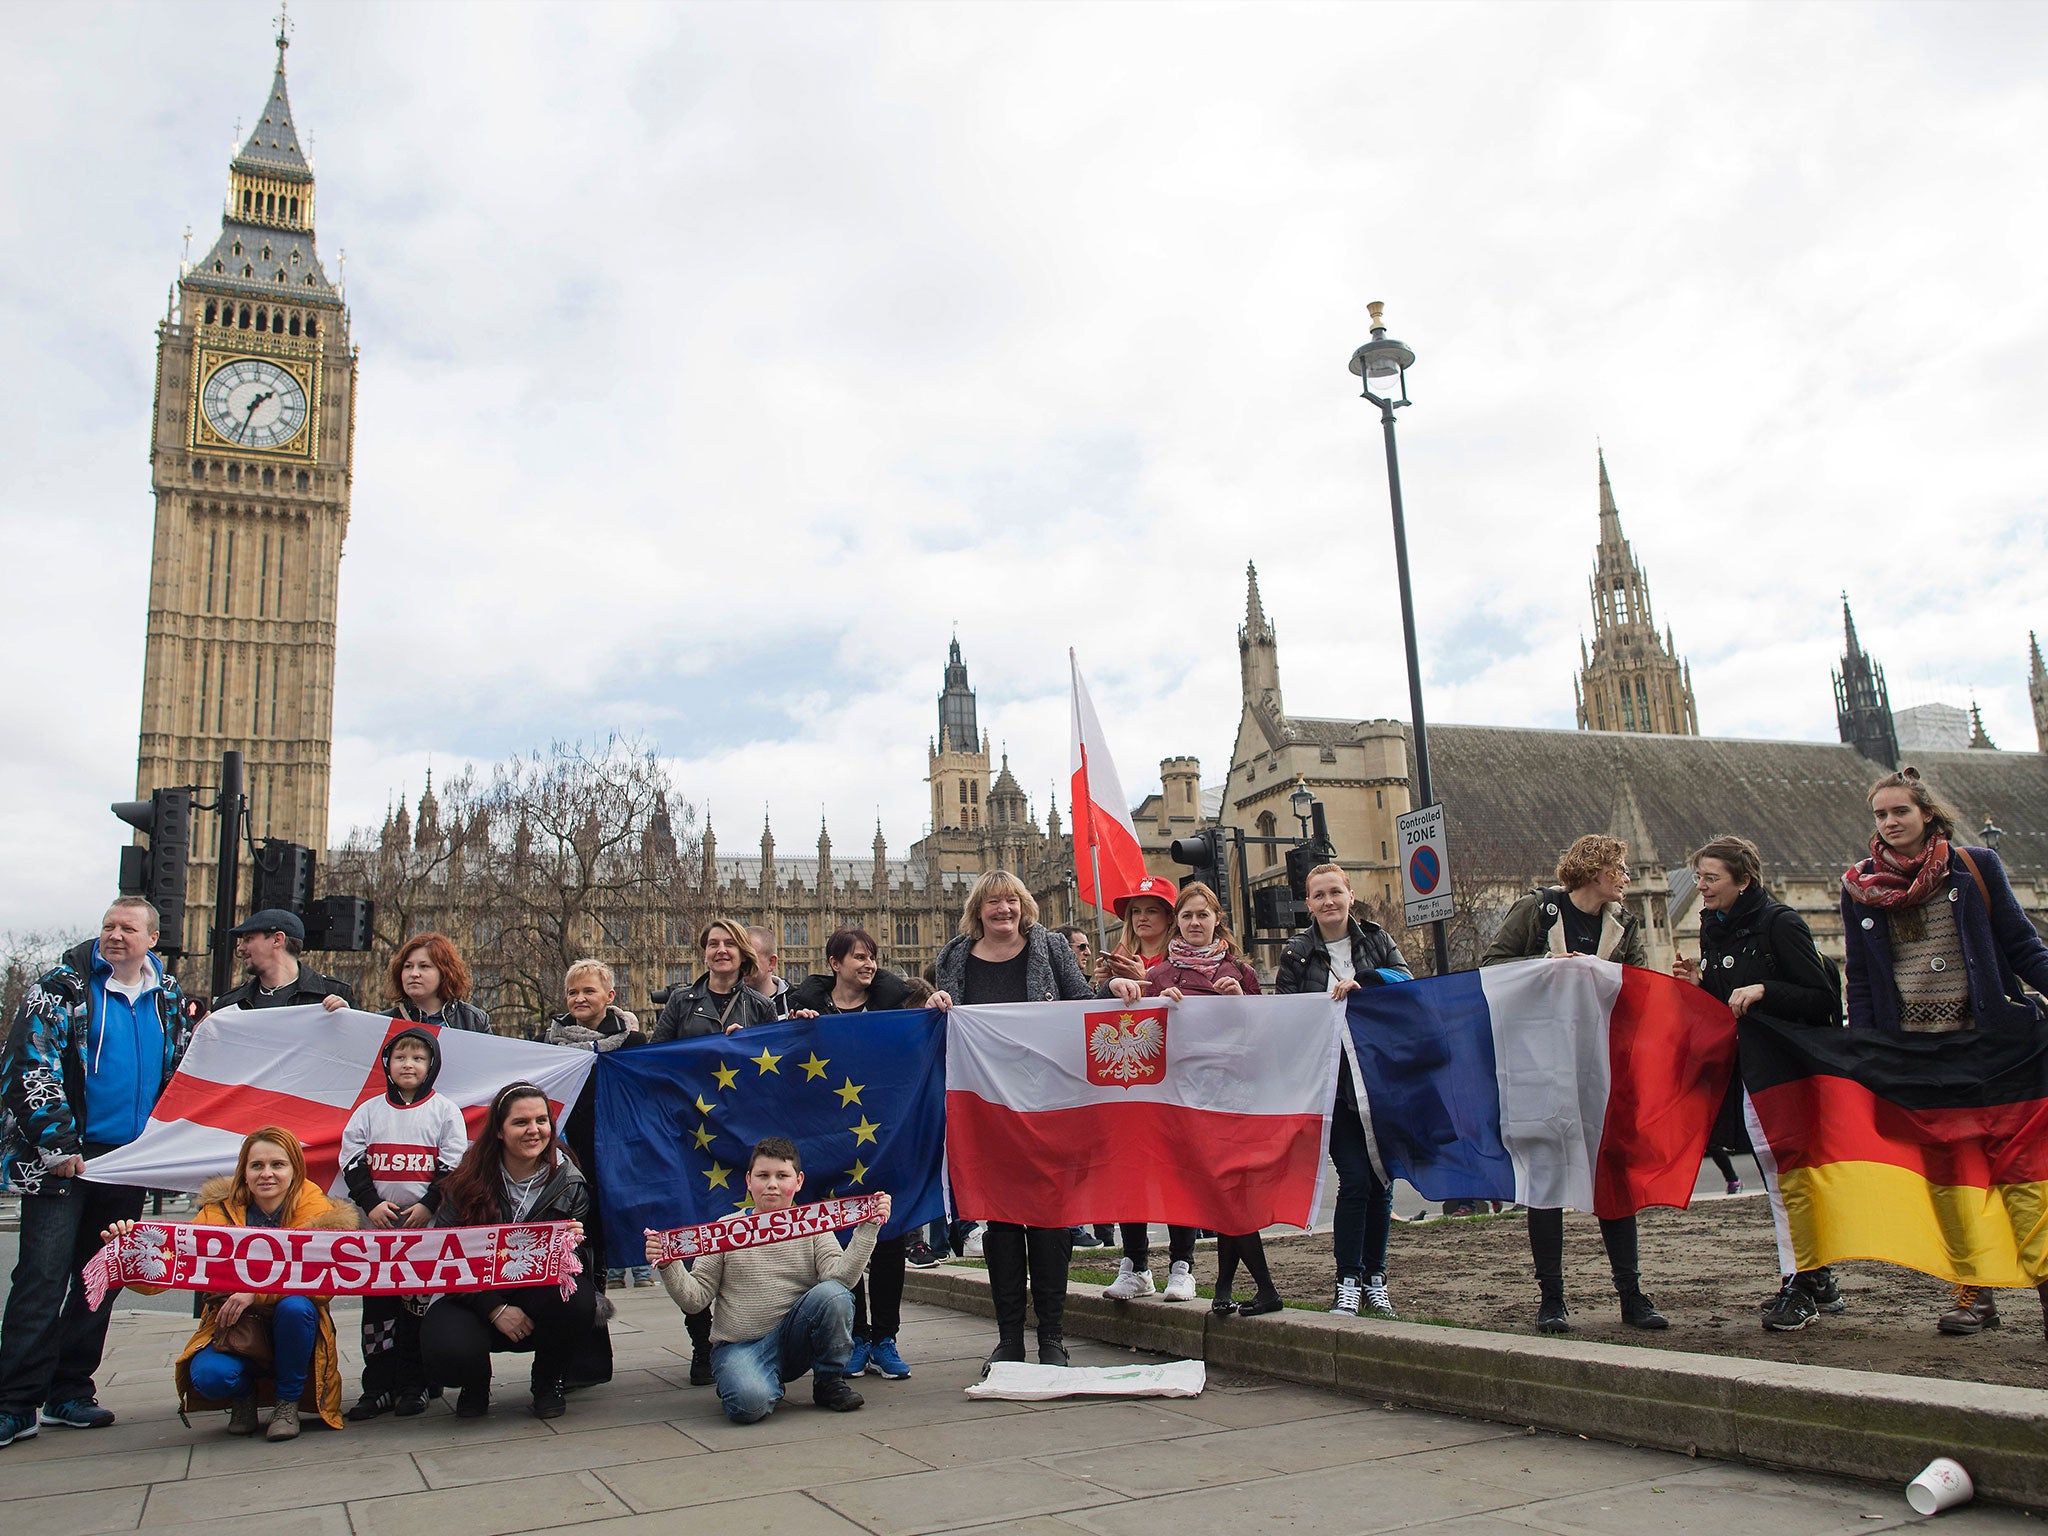 Protesters pose for a photograph with flags from England, European Union, Poland, France and Germany in front of Parliament